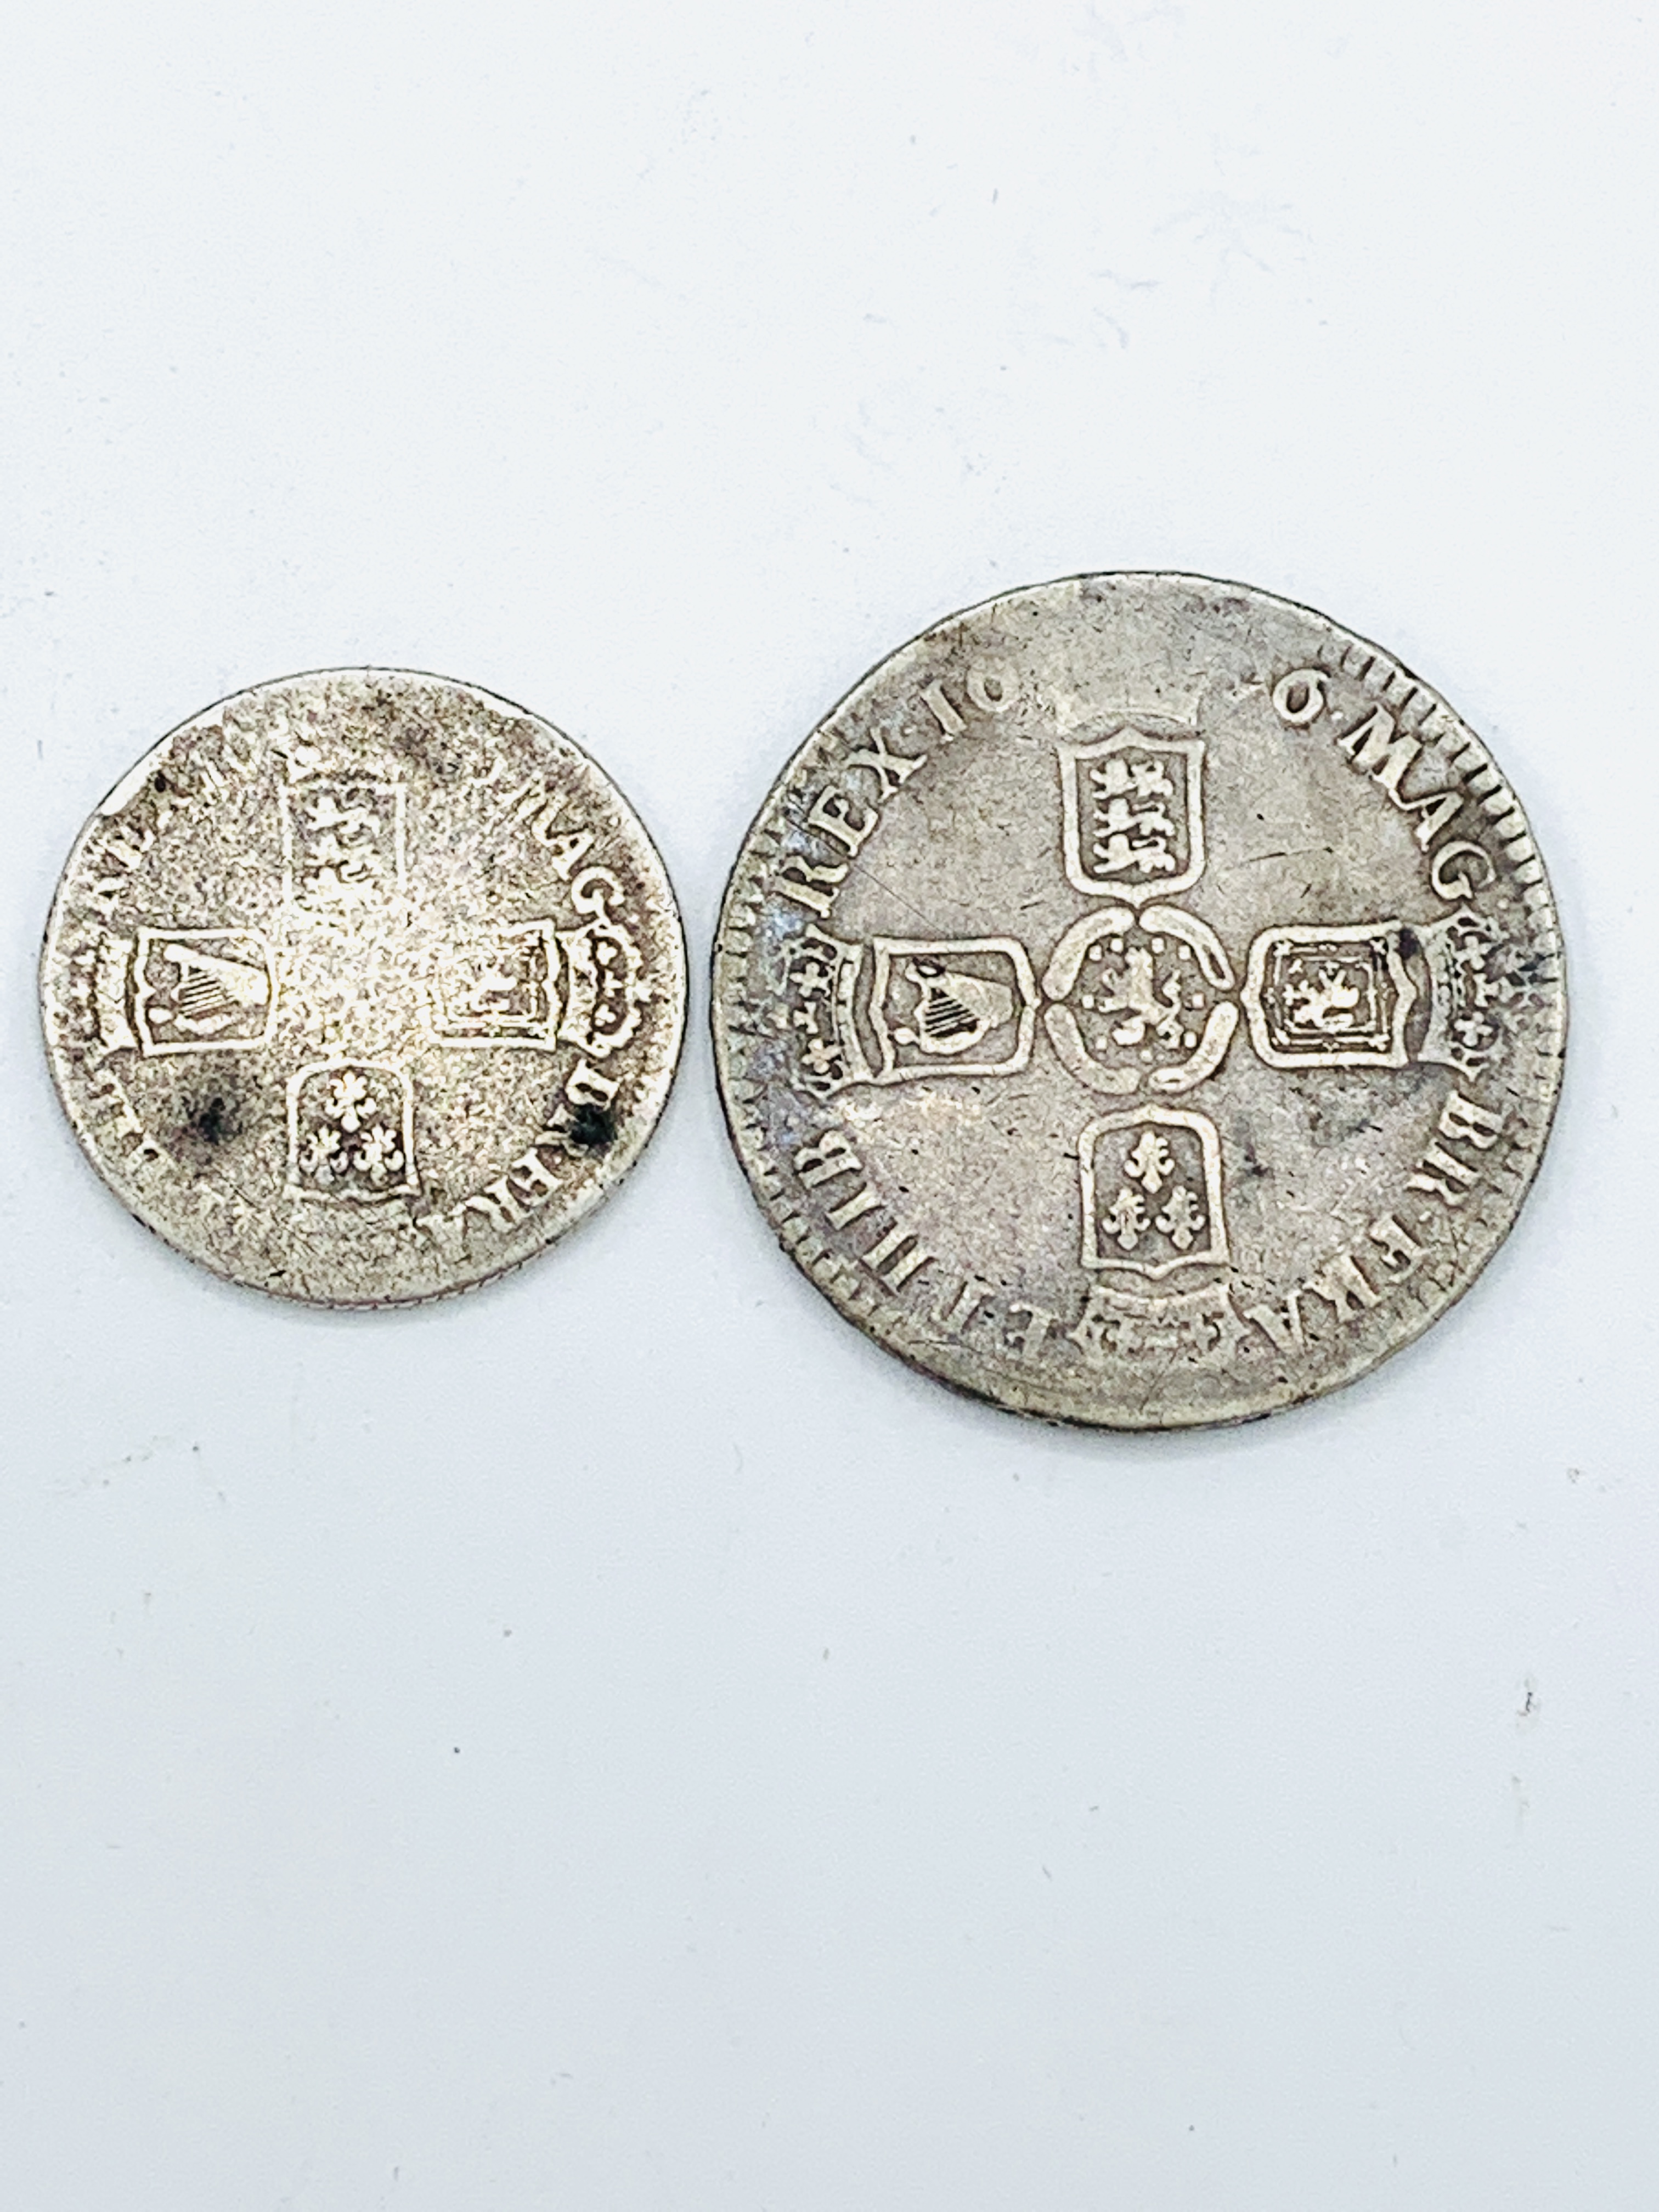 William III silver crown and half crown - Image 4 of 4